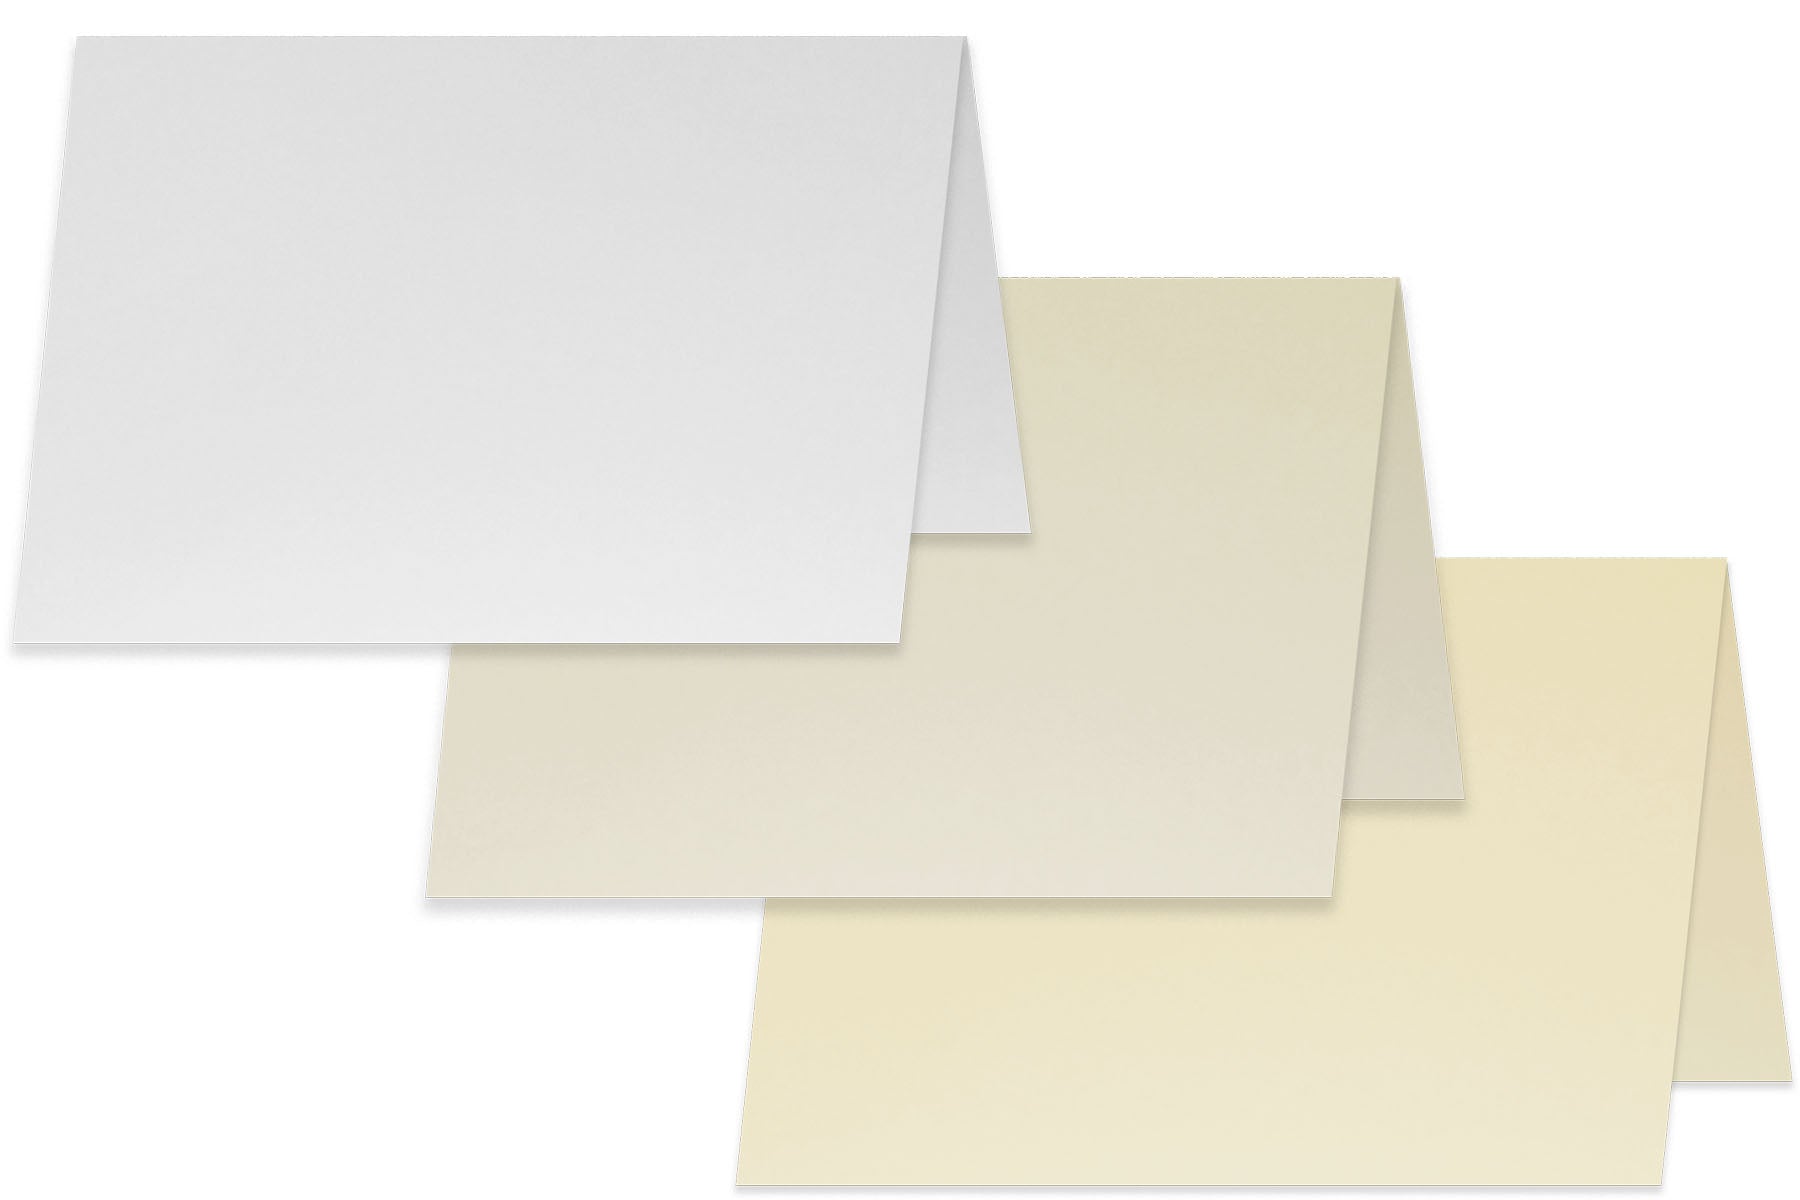 PT Premium Small Folded Note Cards with Matching Envelopes A-1 Set - Small  or Bulk Packs - Great for DIY Blank card sets, Greeting Cards, Thank You's